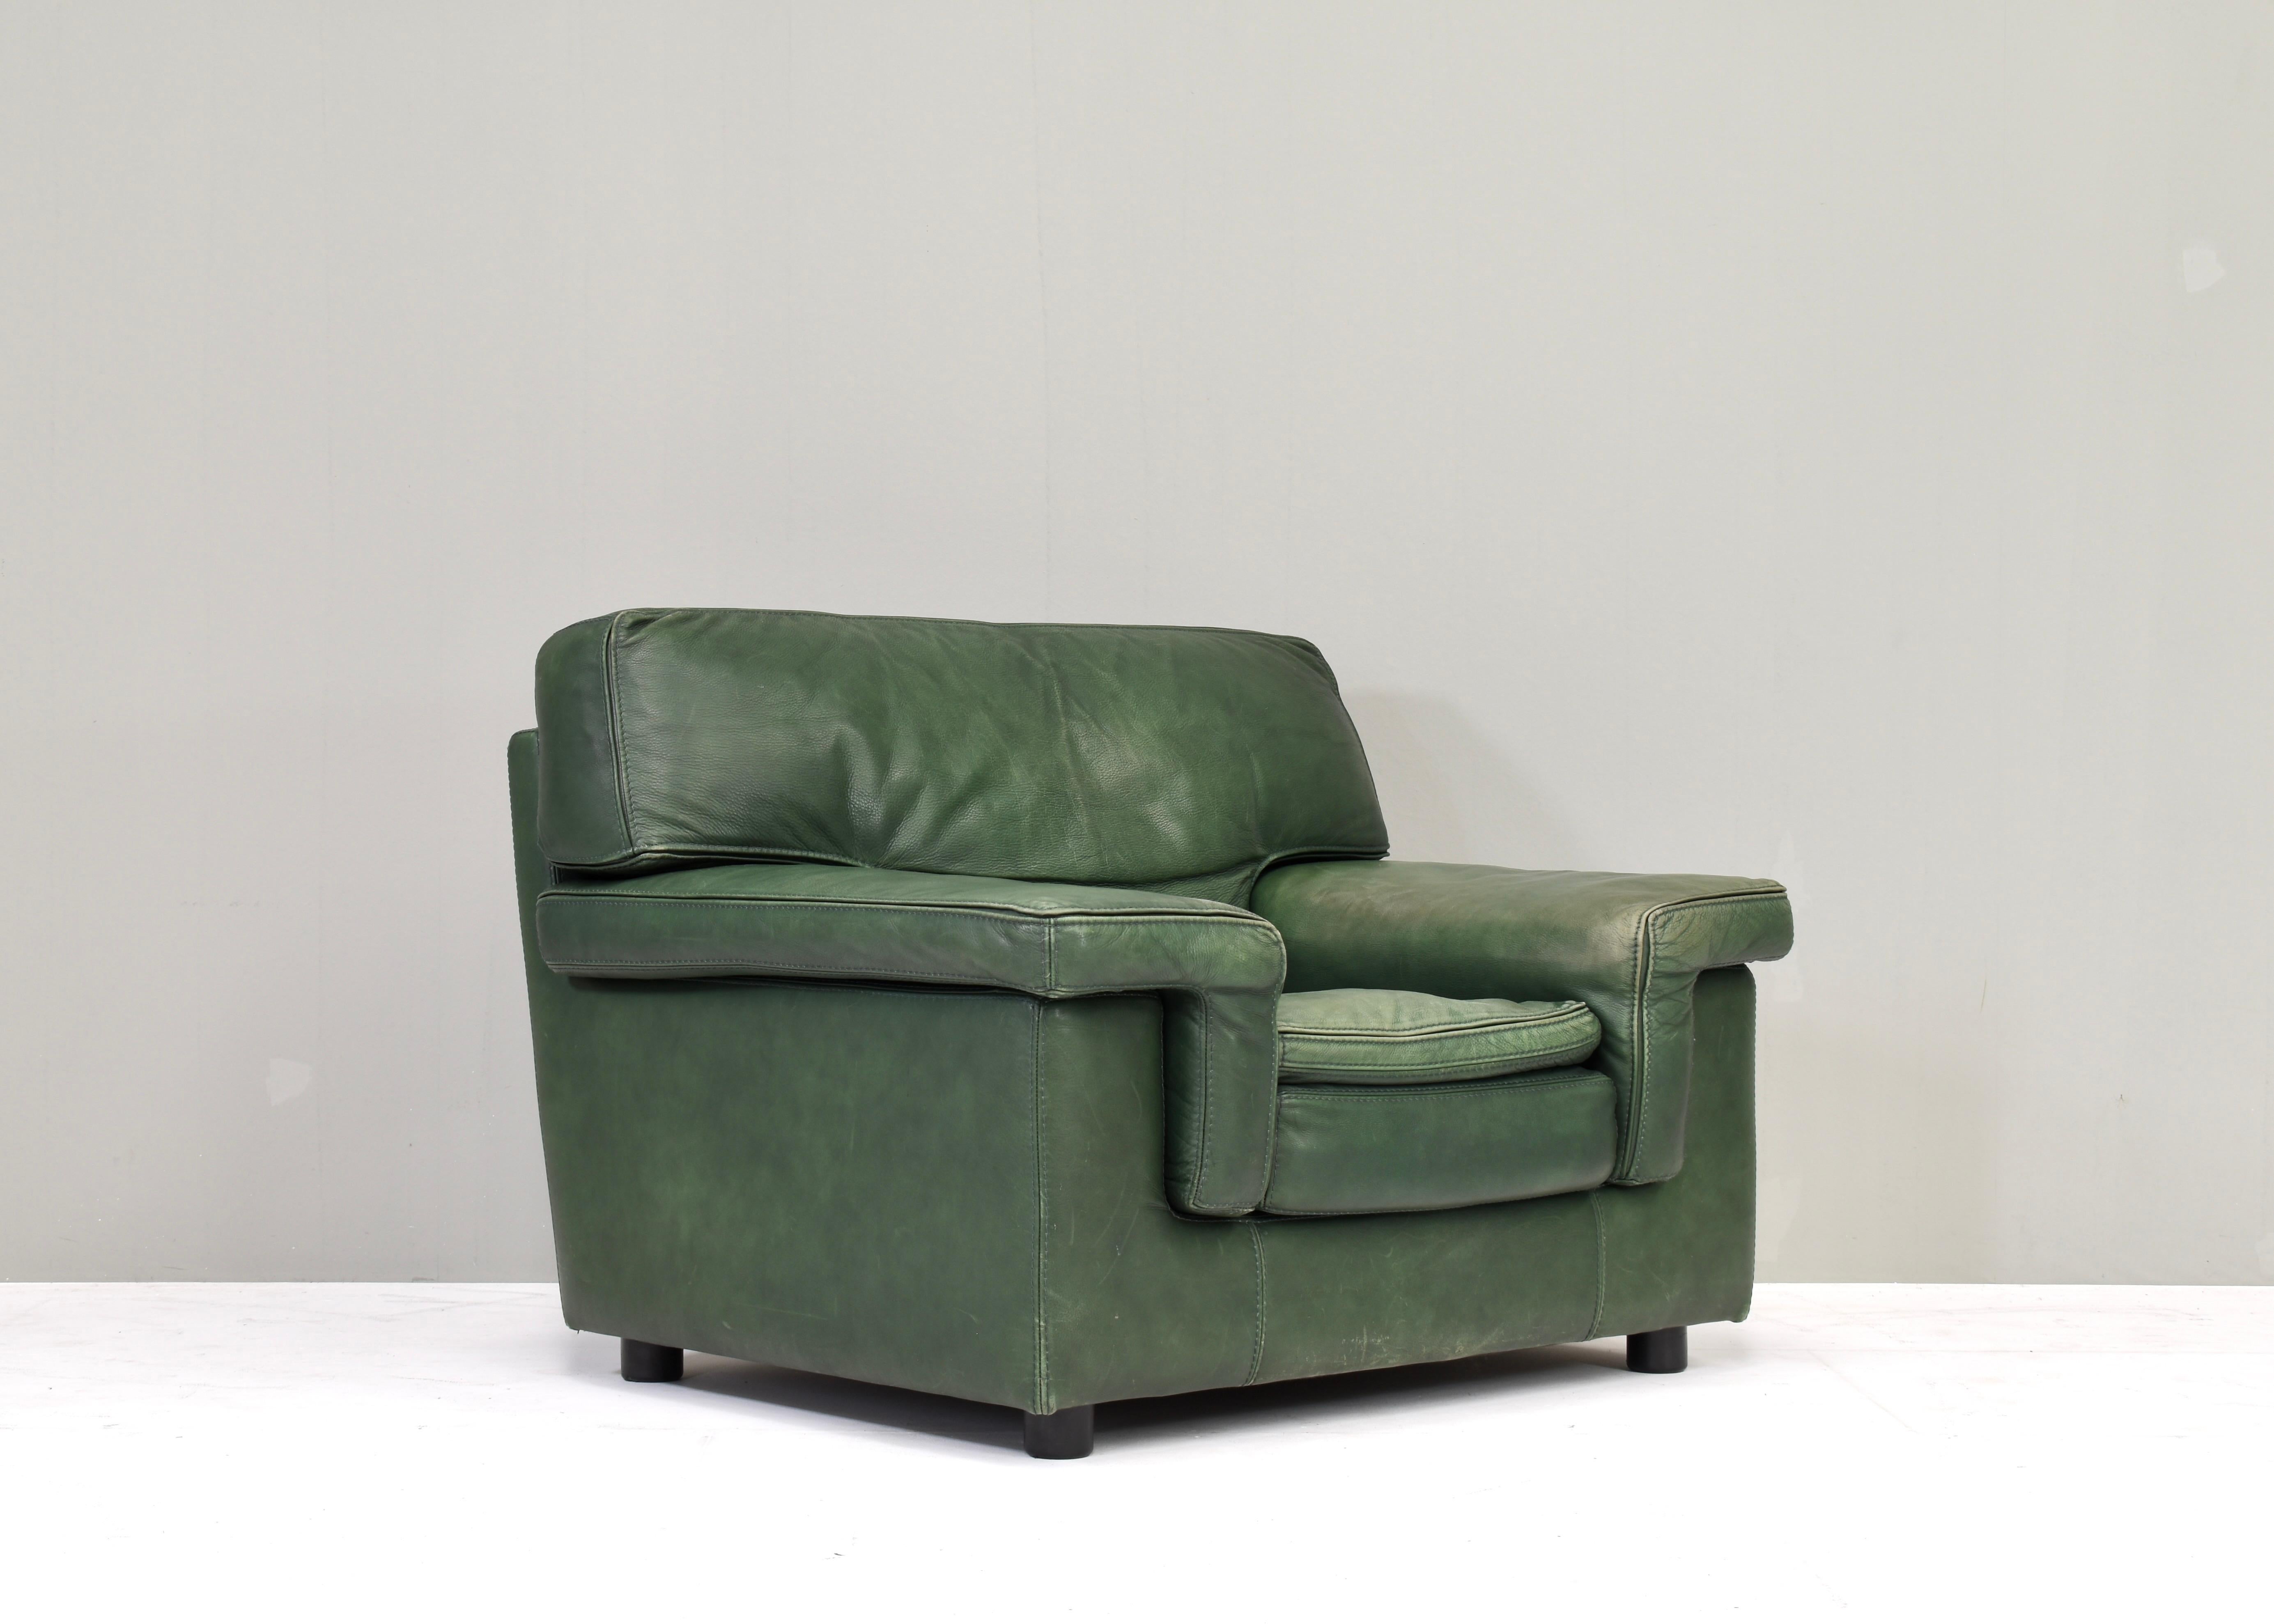 Roche Bobois Lounge Armchair in Original Green Patinated Leather – circa 1970 In Good Condition For Sale In Pijnacker, Zuid-Holland